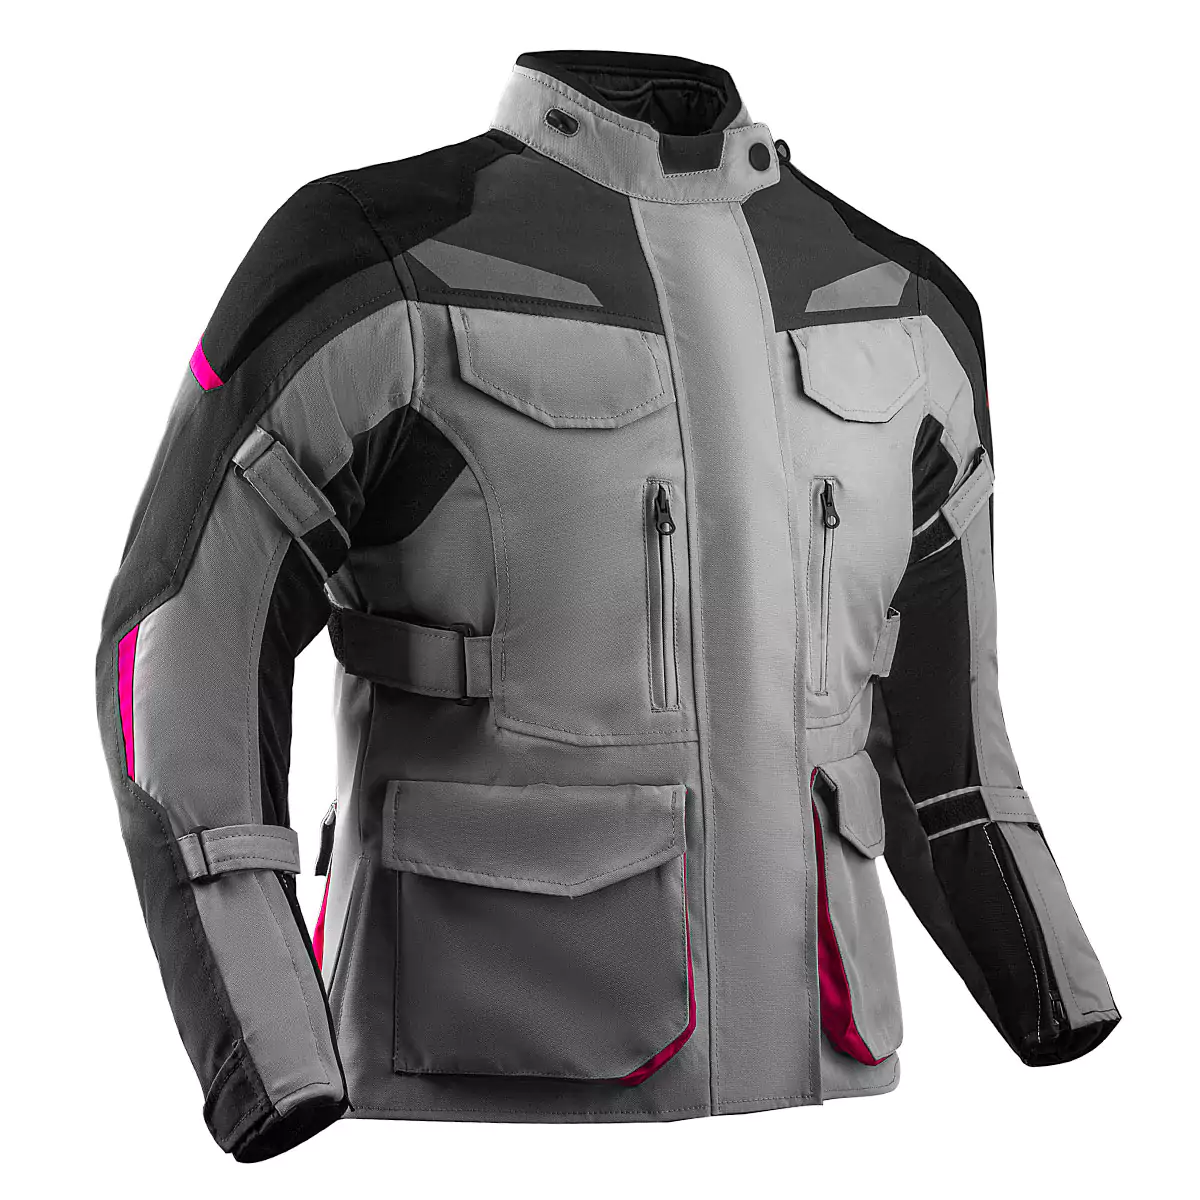 Textile motorcycle jacket with protective padding and reflective accents.